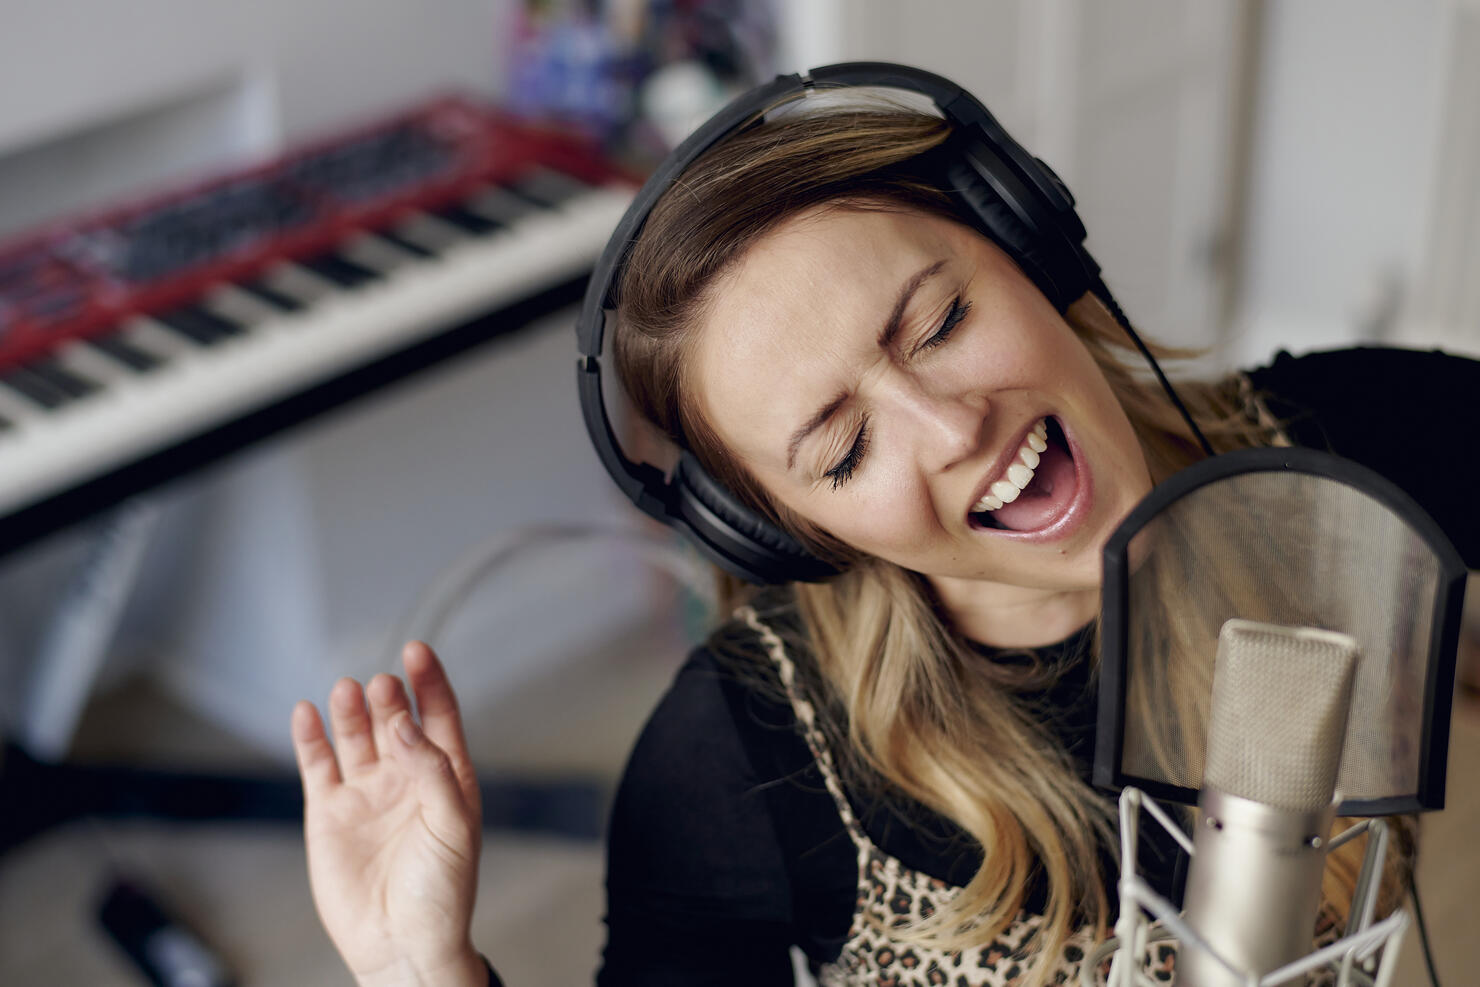 Young woman singing in home recording studio